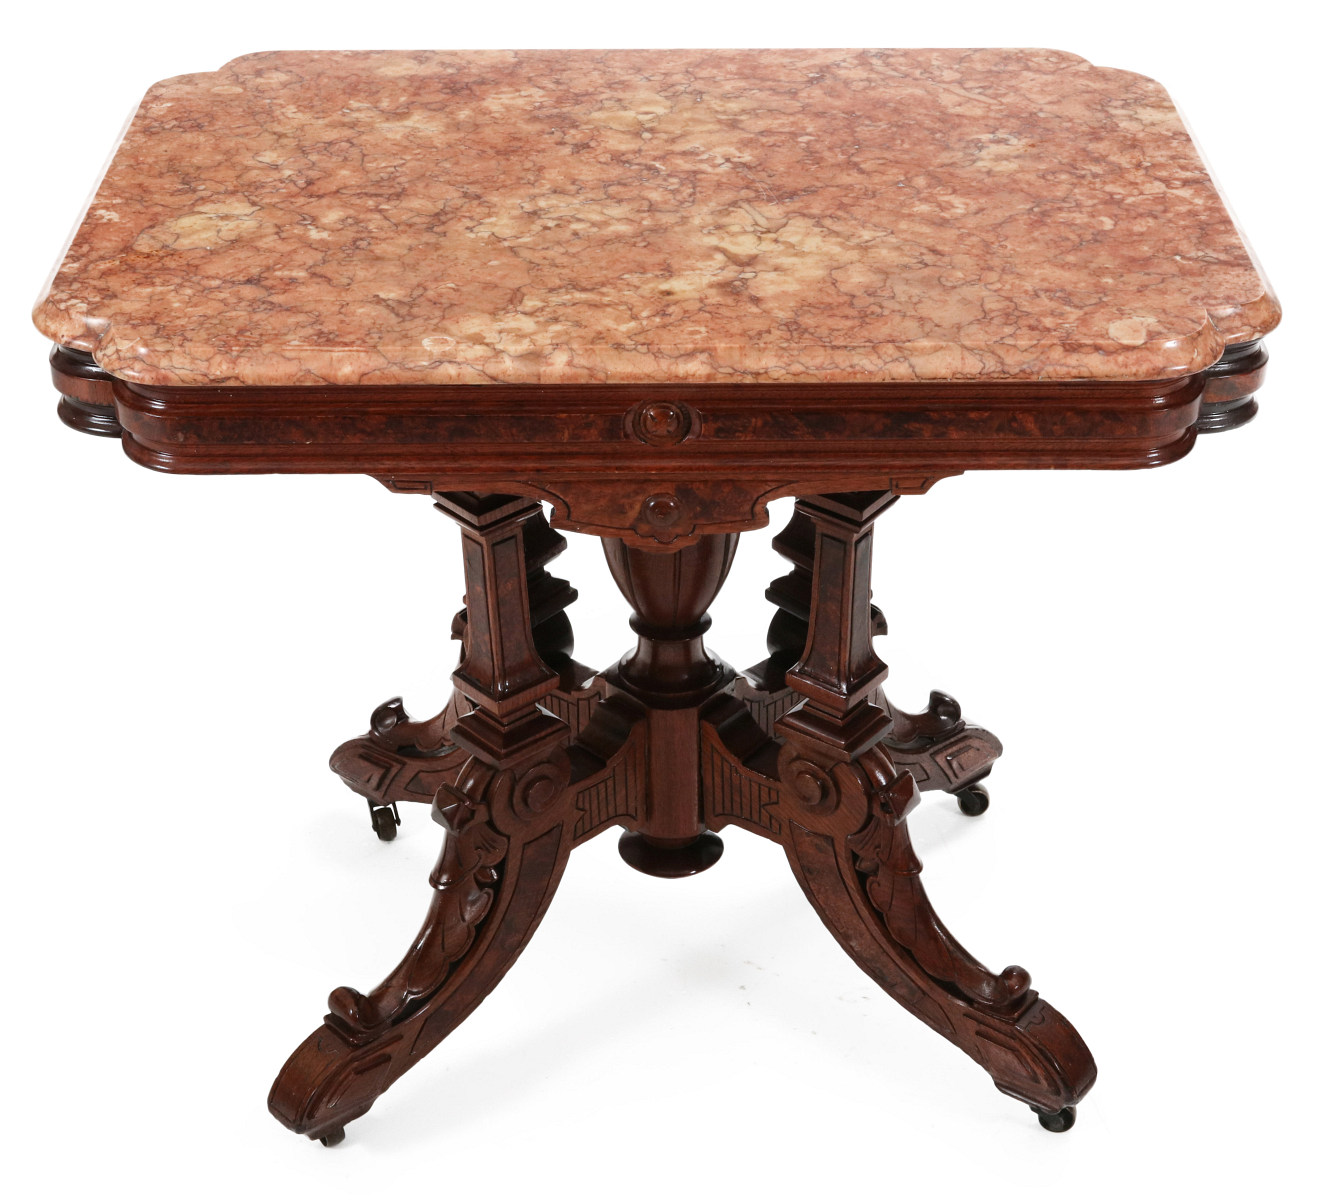 AN ELABORATELY CARVED 19TH C. WALNUT CENTER TABLE